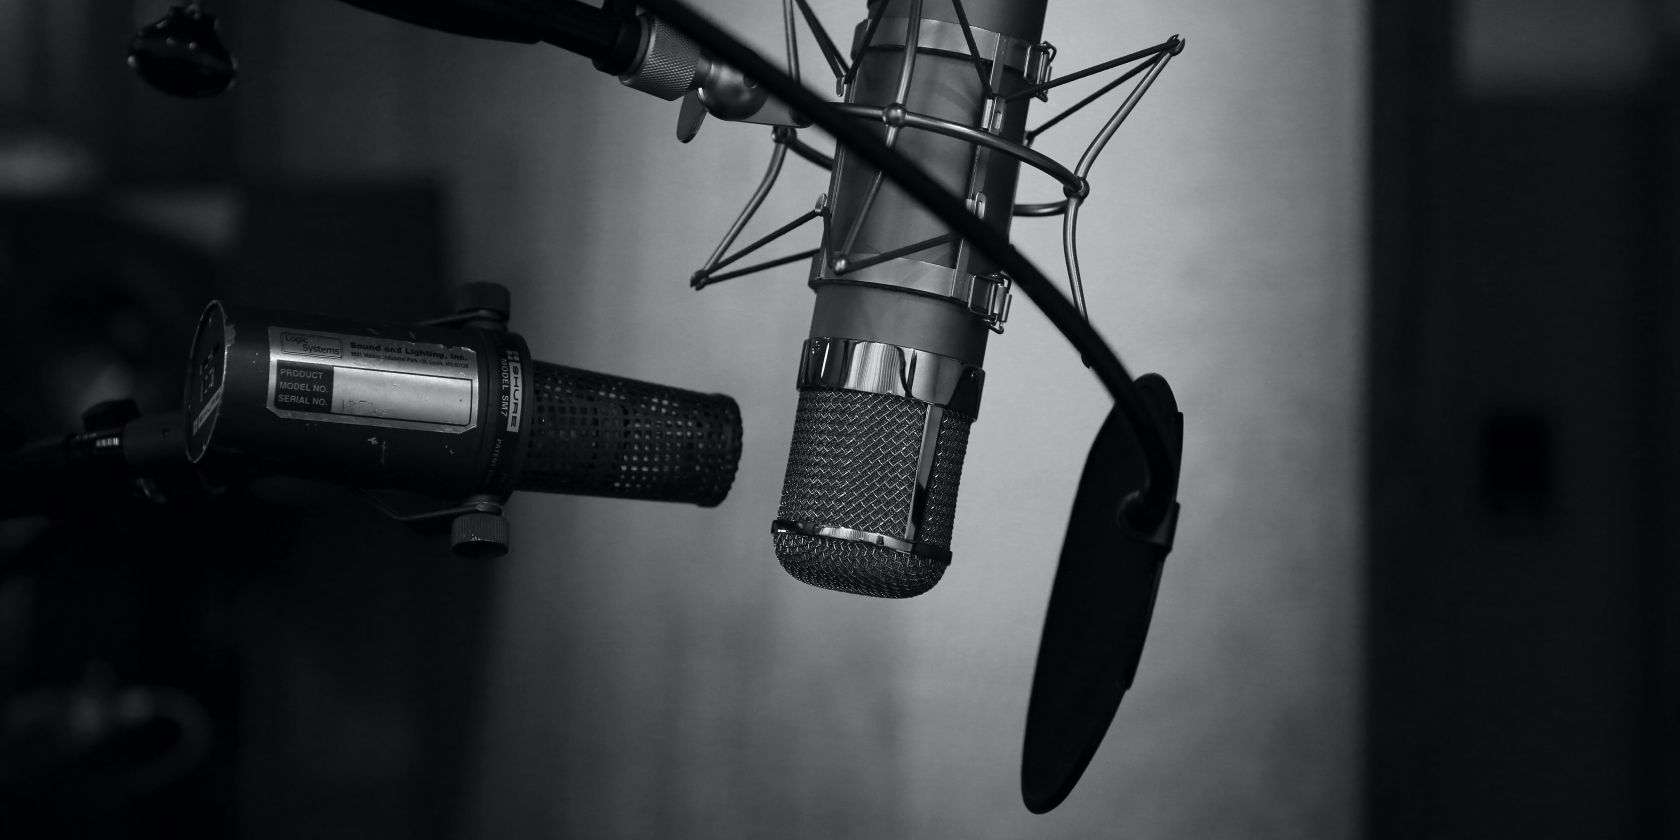 Grayscale image of a condenser microphone